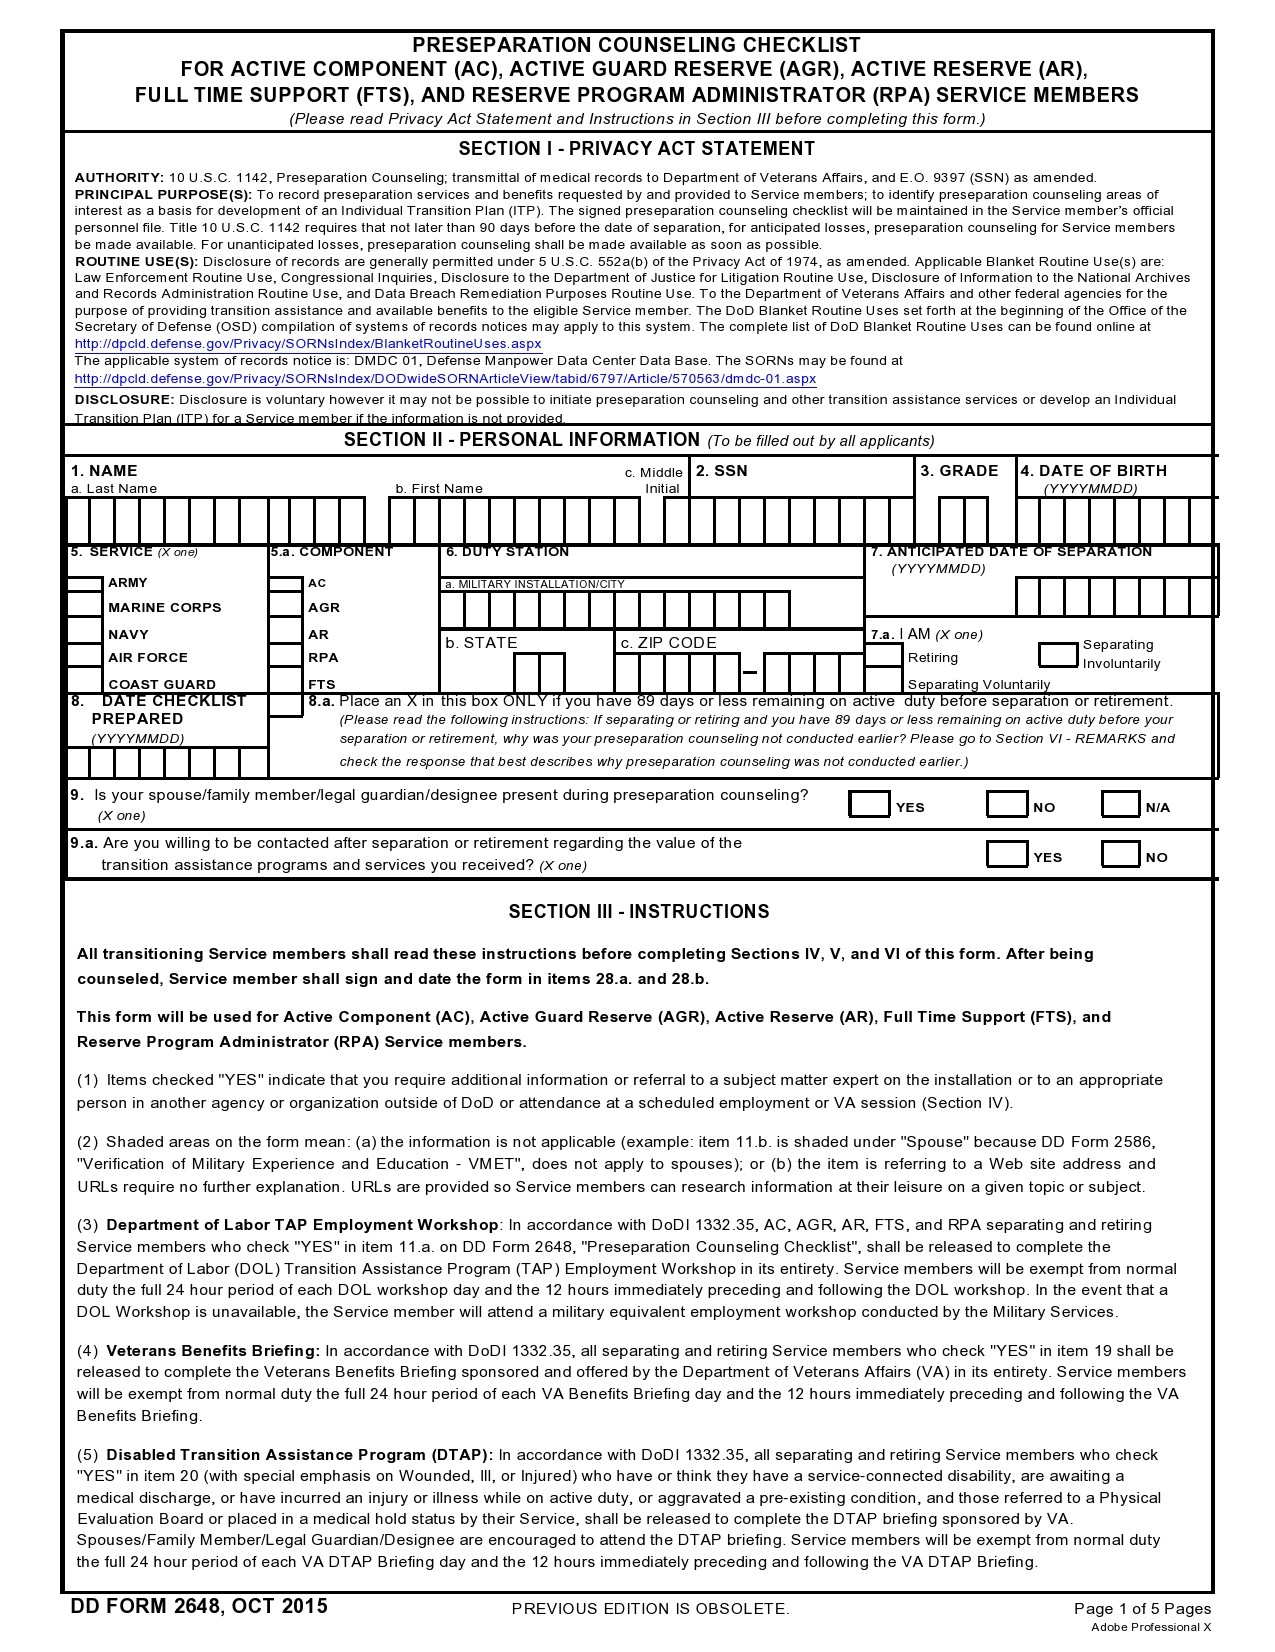 Free army counseling form 17